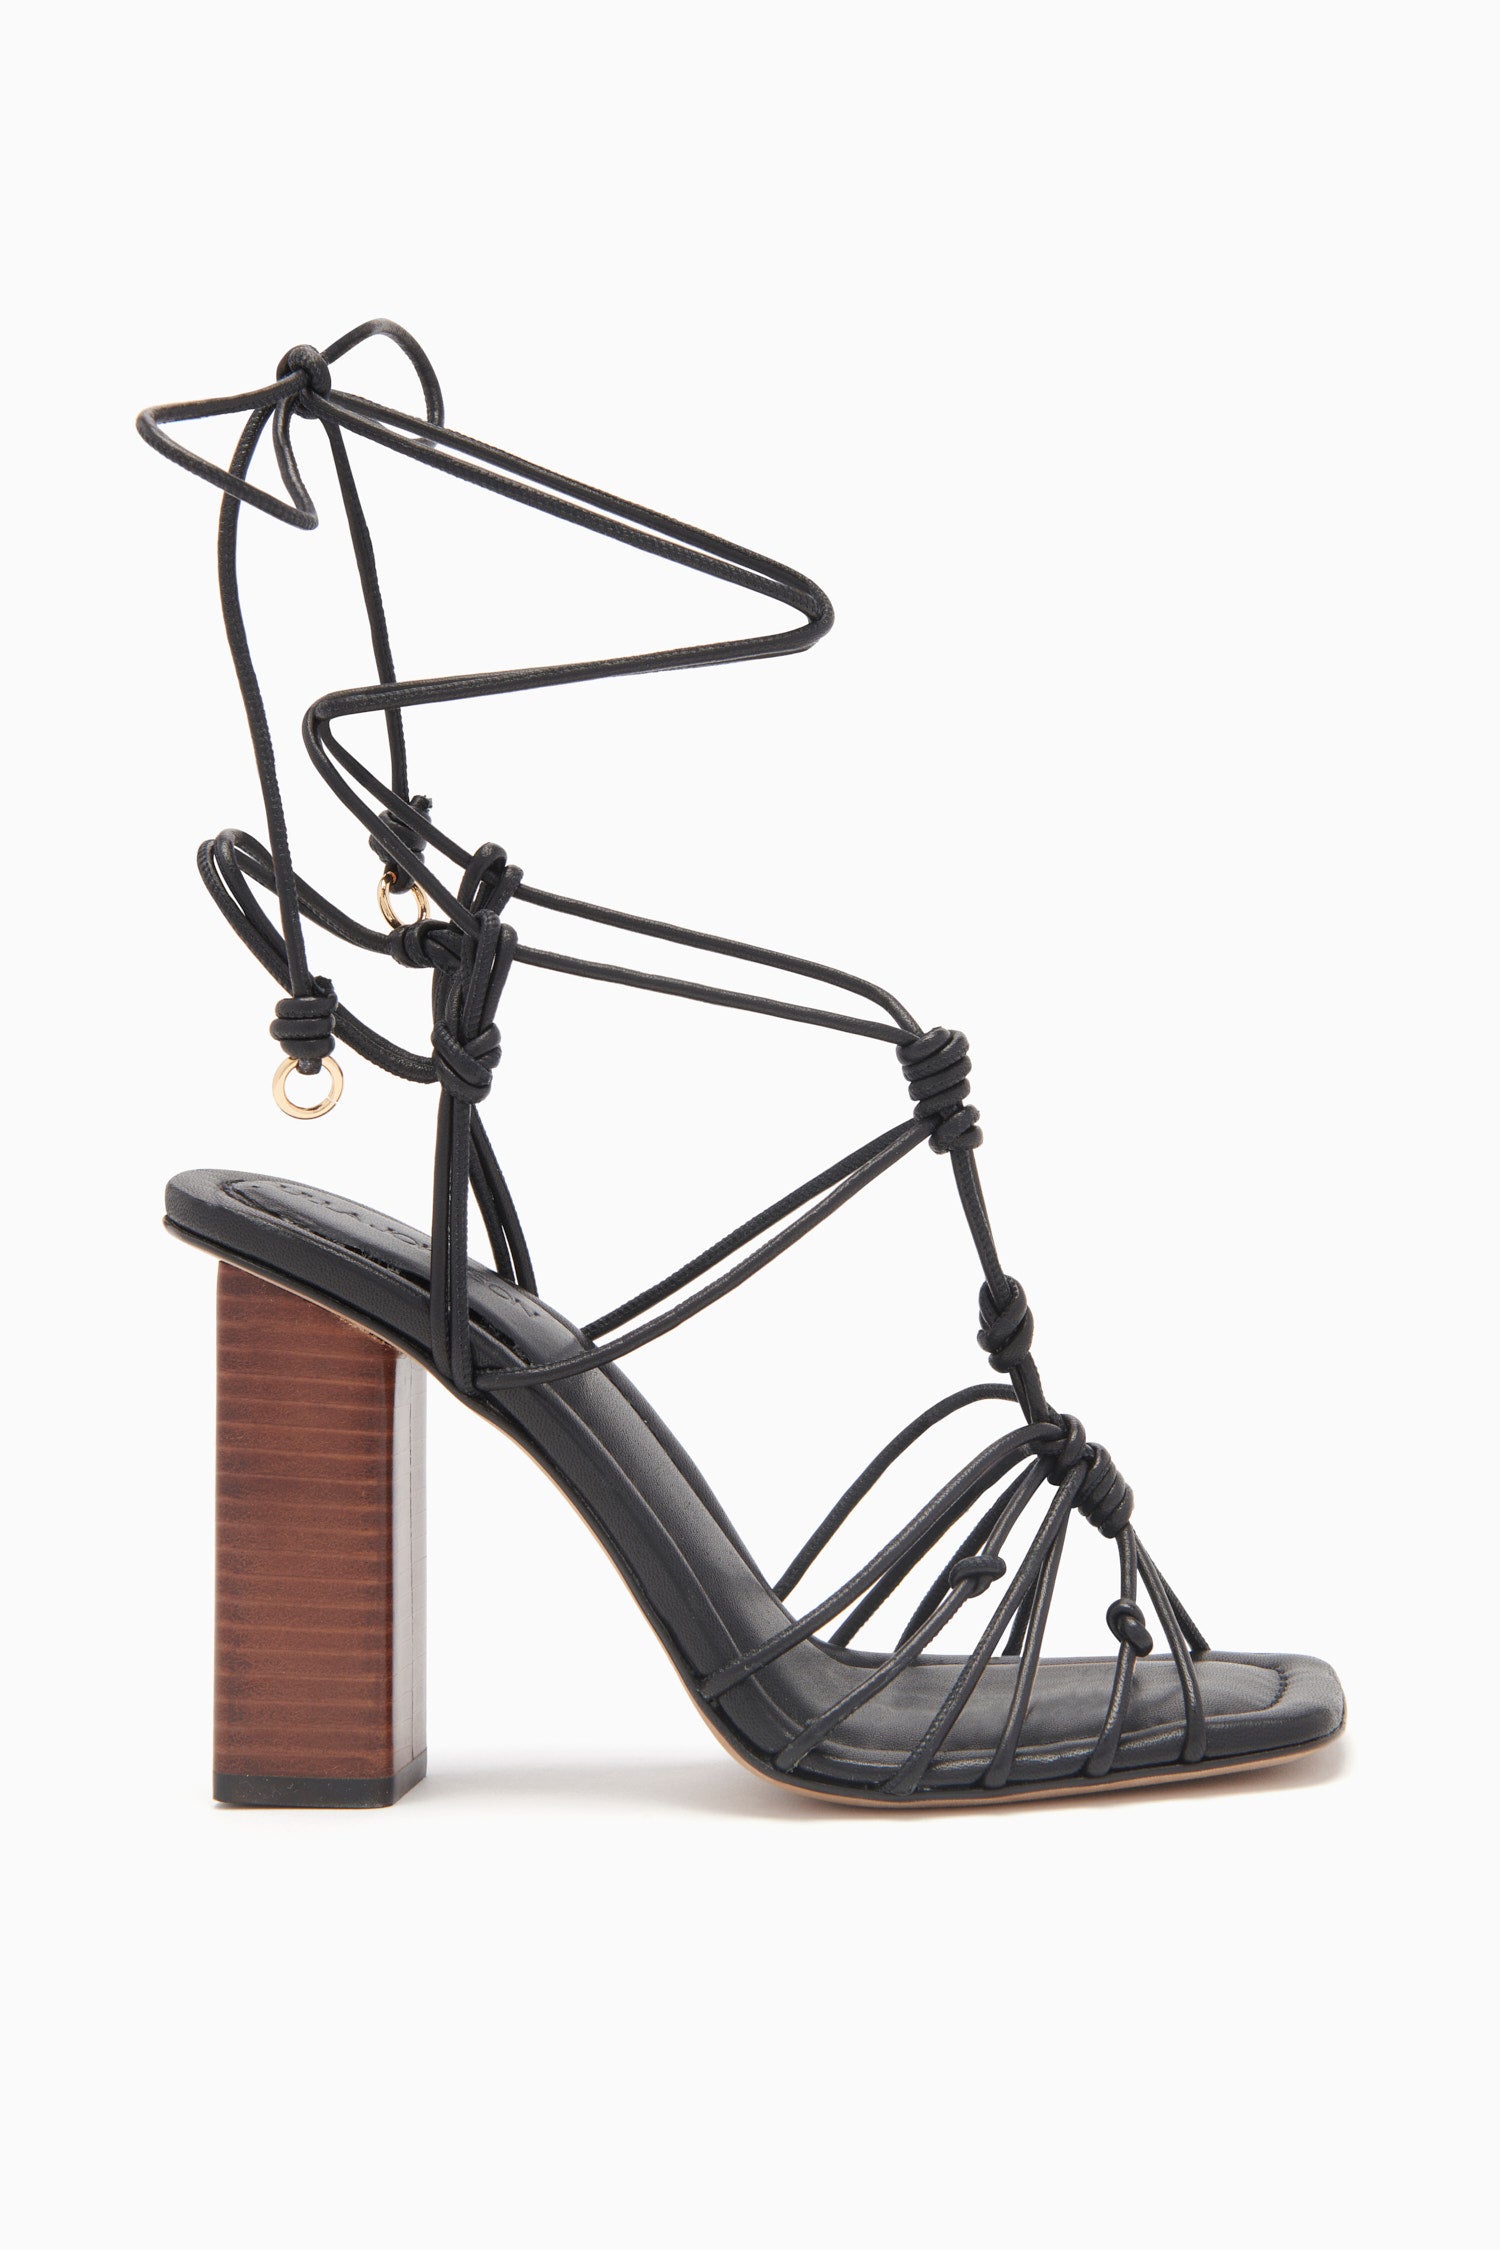 Where's That From Black Pu Adrianna Strappy Block Heels - Matalan